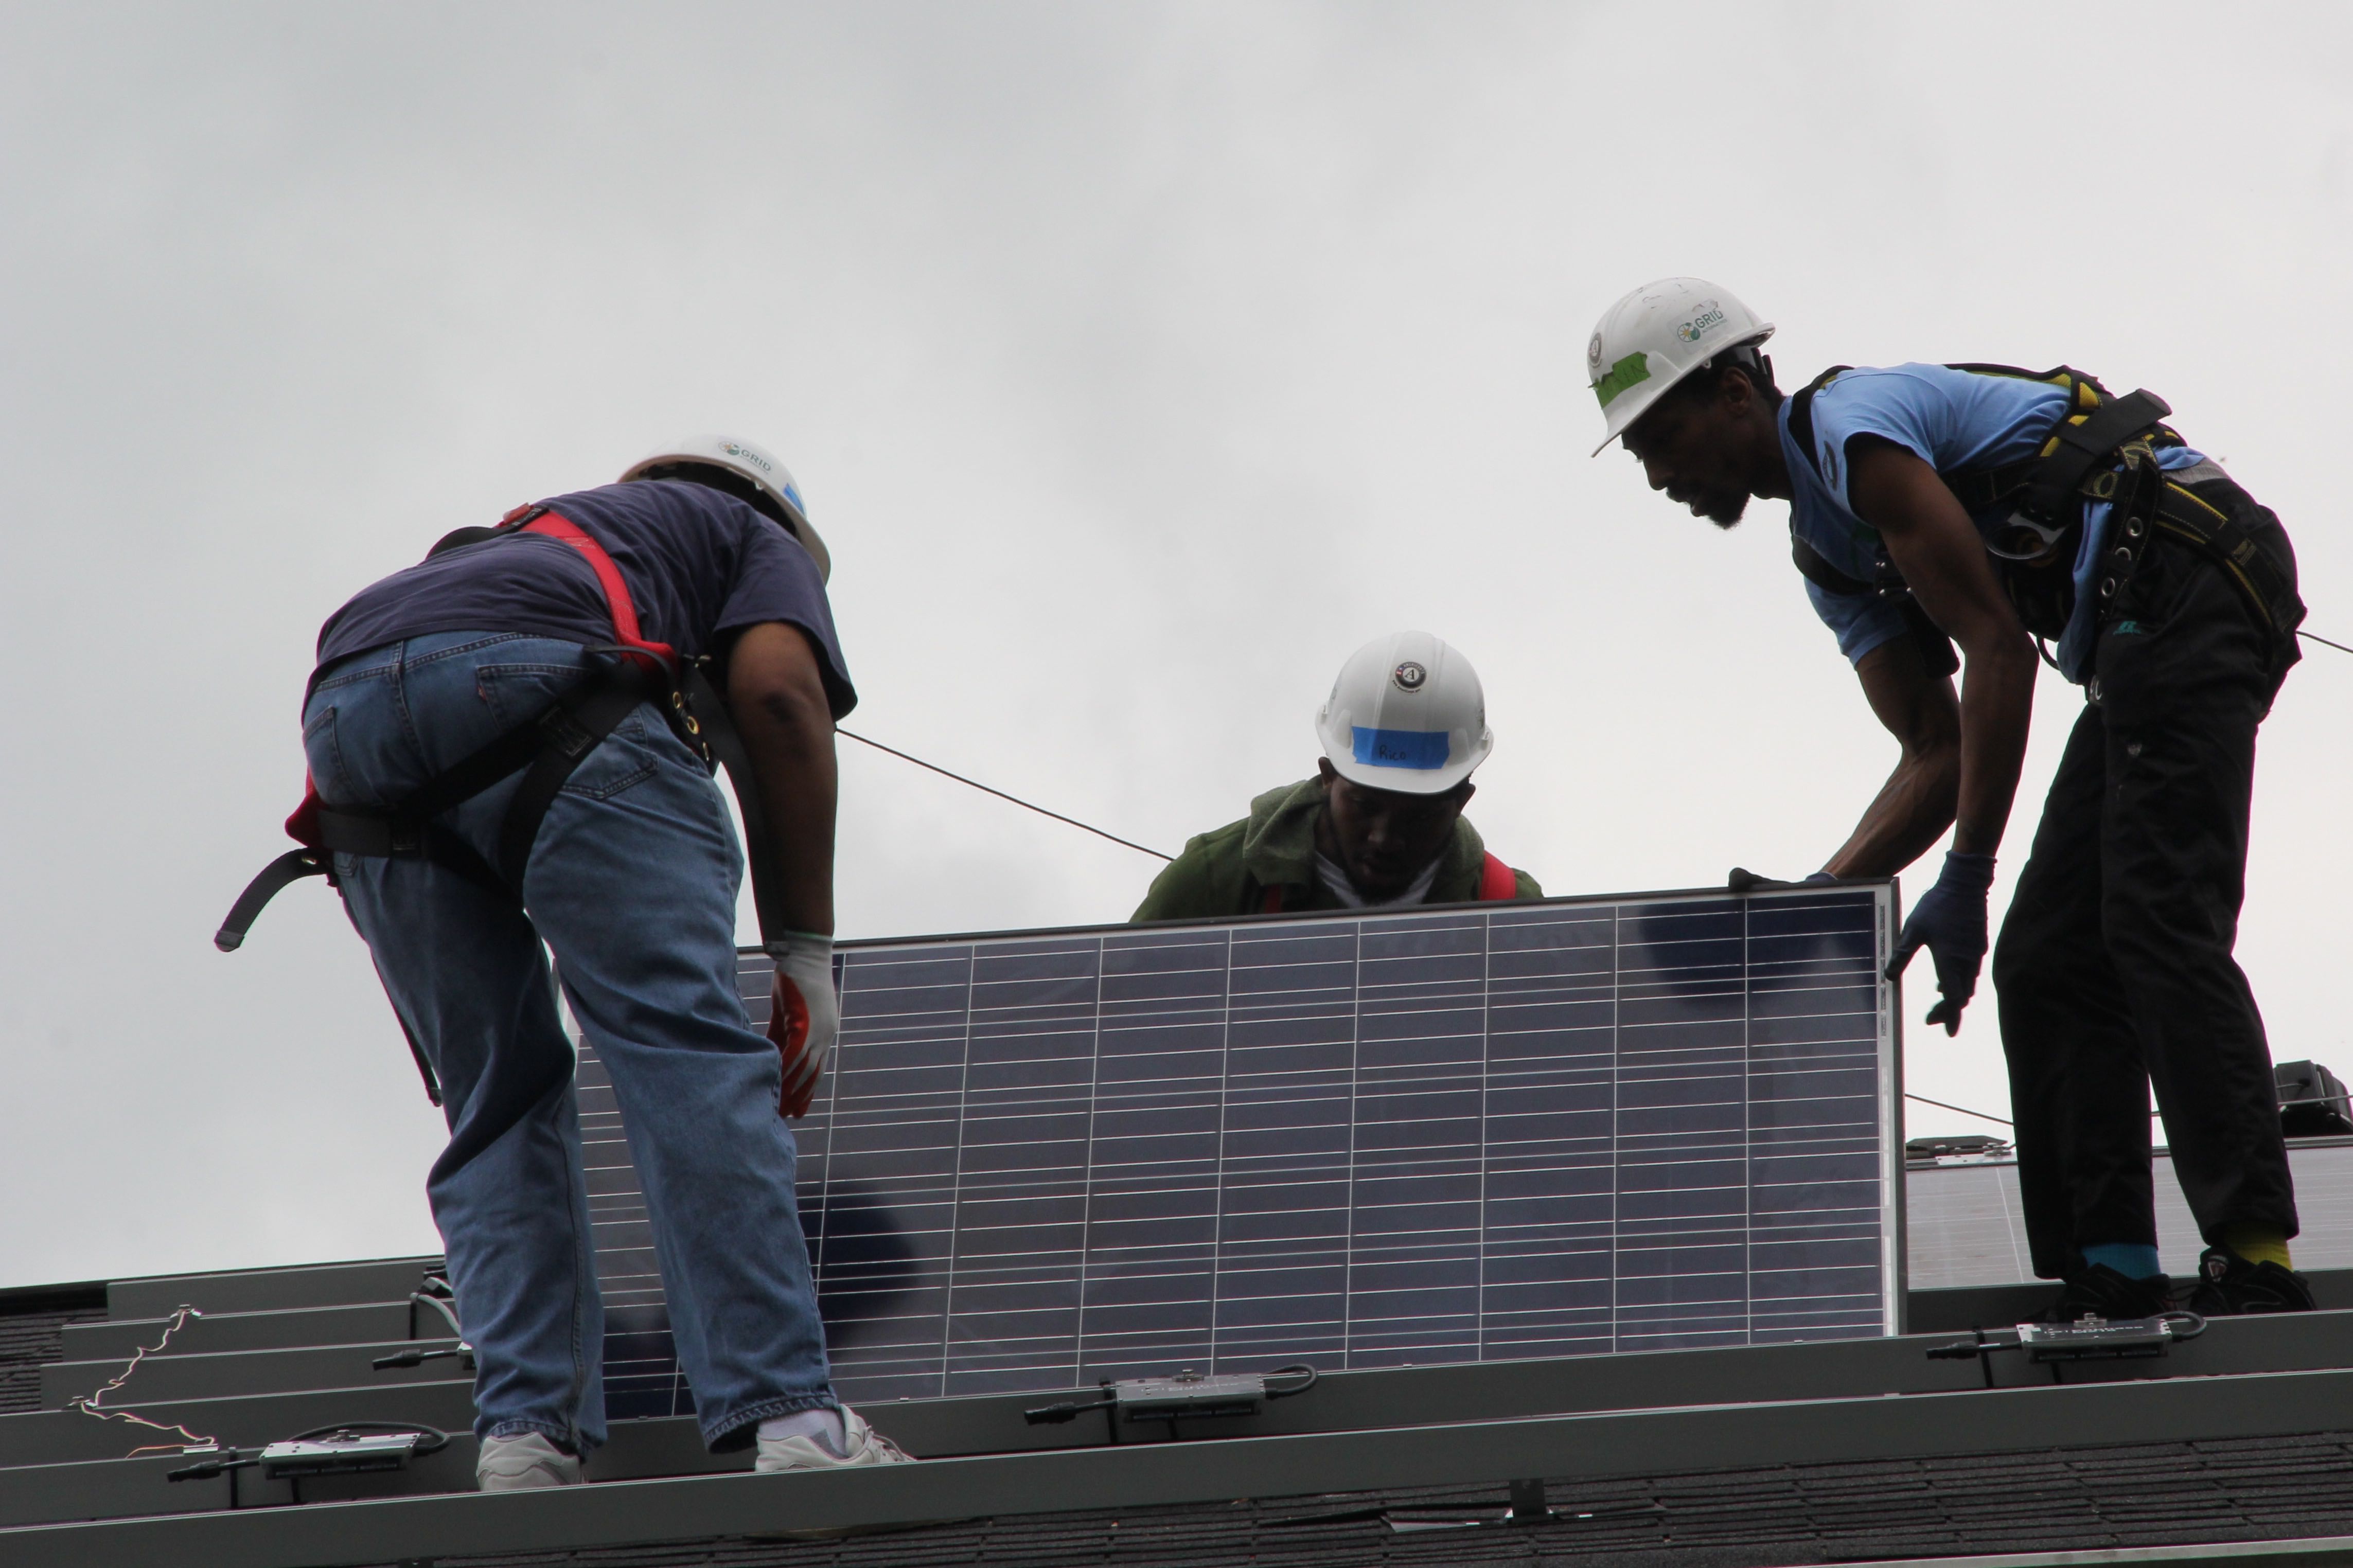 Turning low-income neighborhoods on to solar power